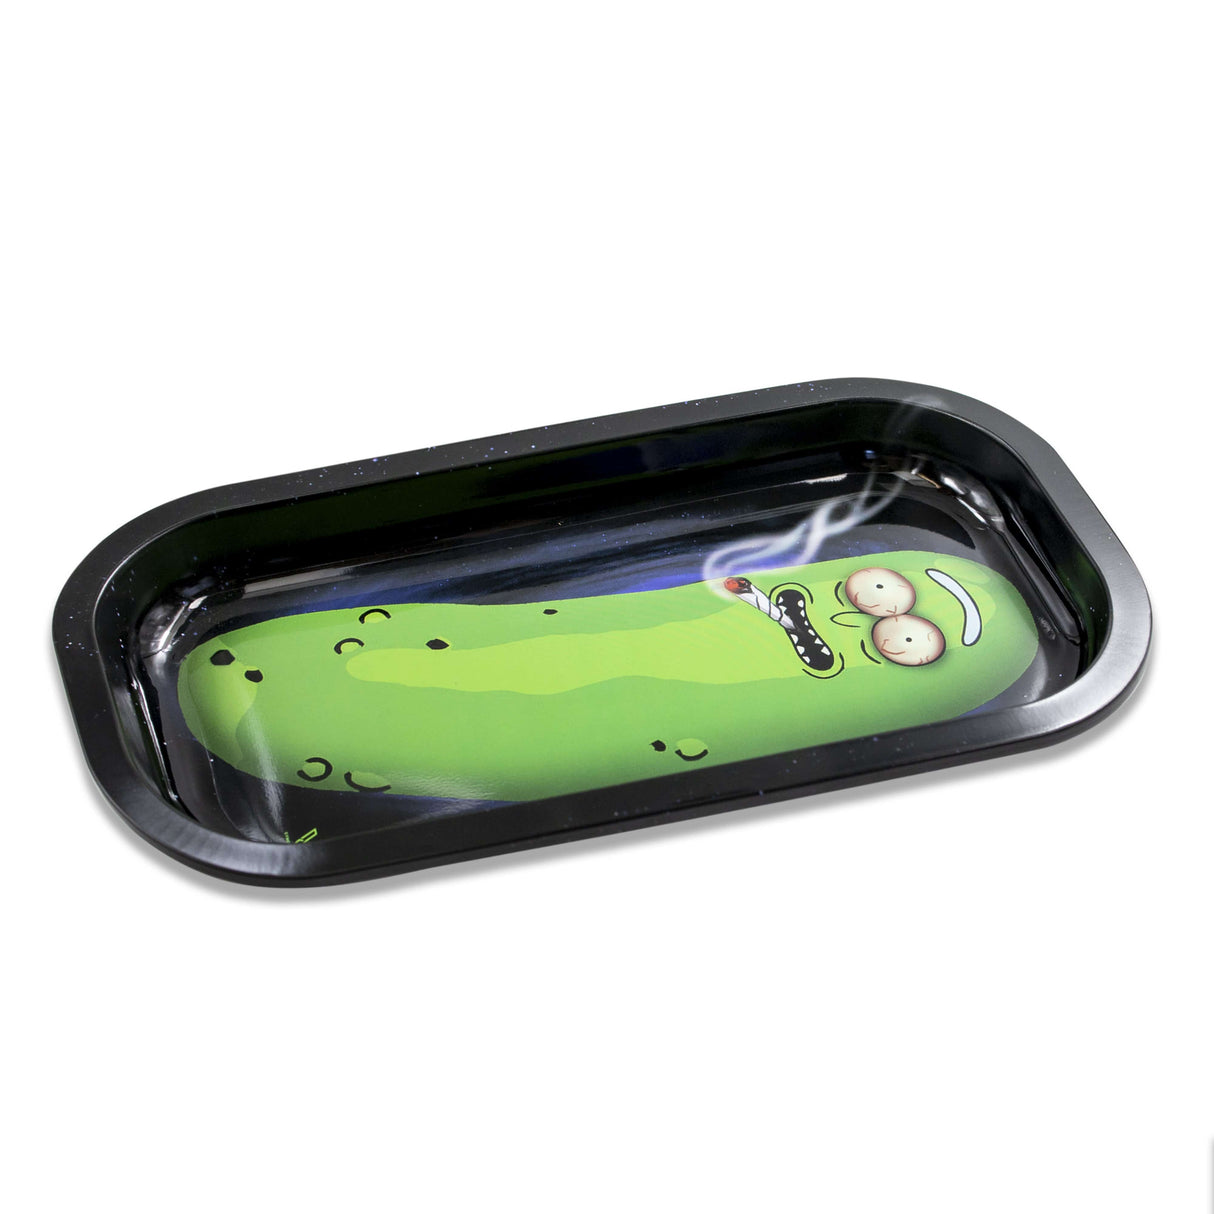 V Syndicate Pickle Metal Rollin' Tray in black and green, compact and portable design, top view